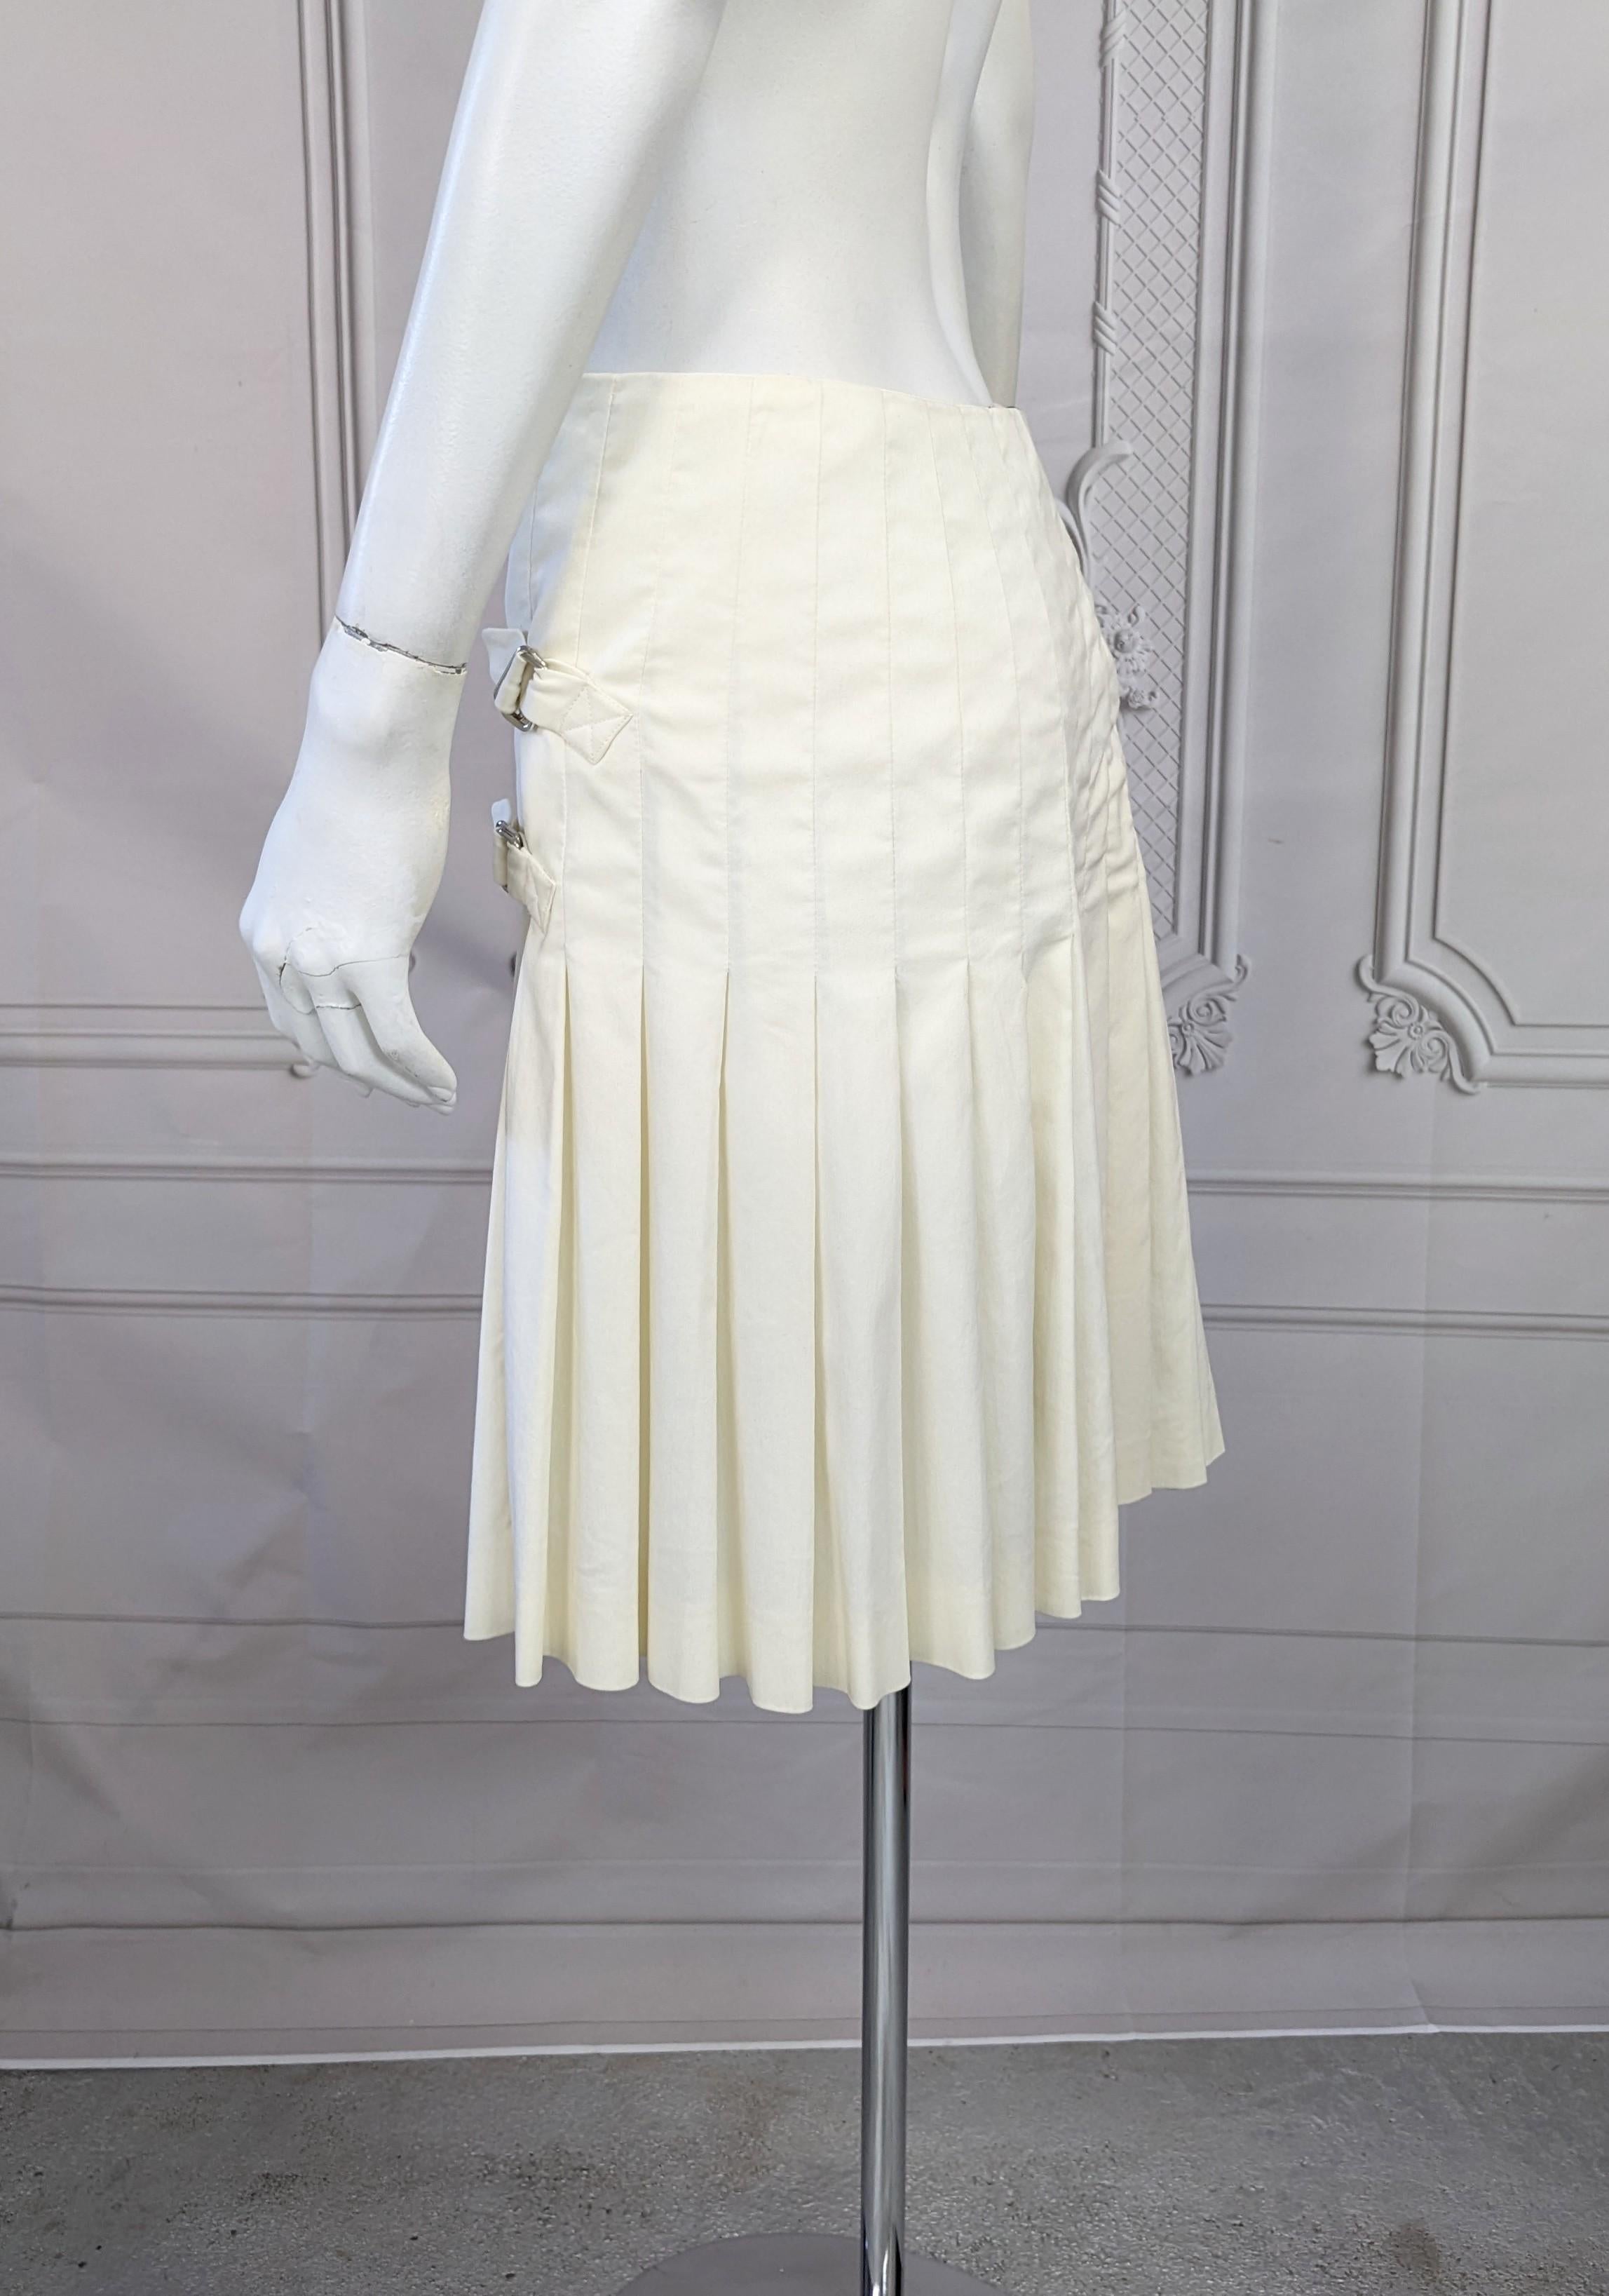 John Galliano Spring/Summer 2000 Asymmetrical Wrap Kilt Skirt In Excellent Condition For Sale In New York, NY